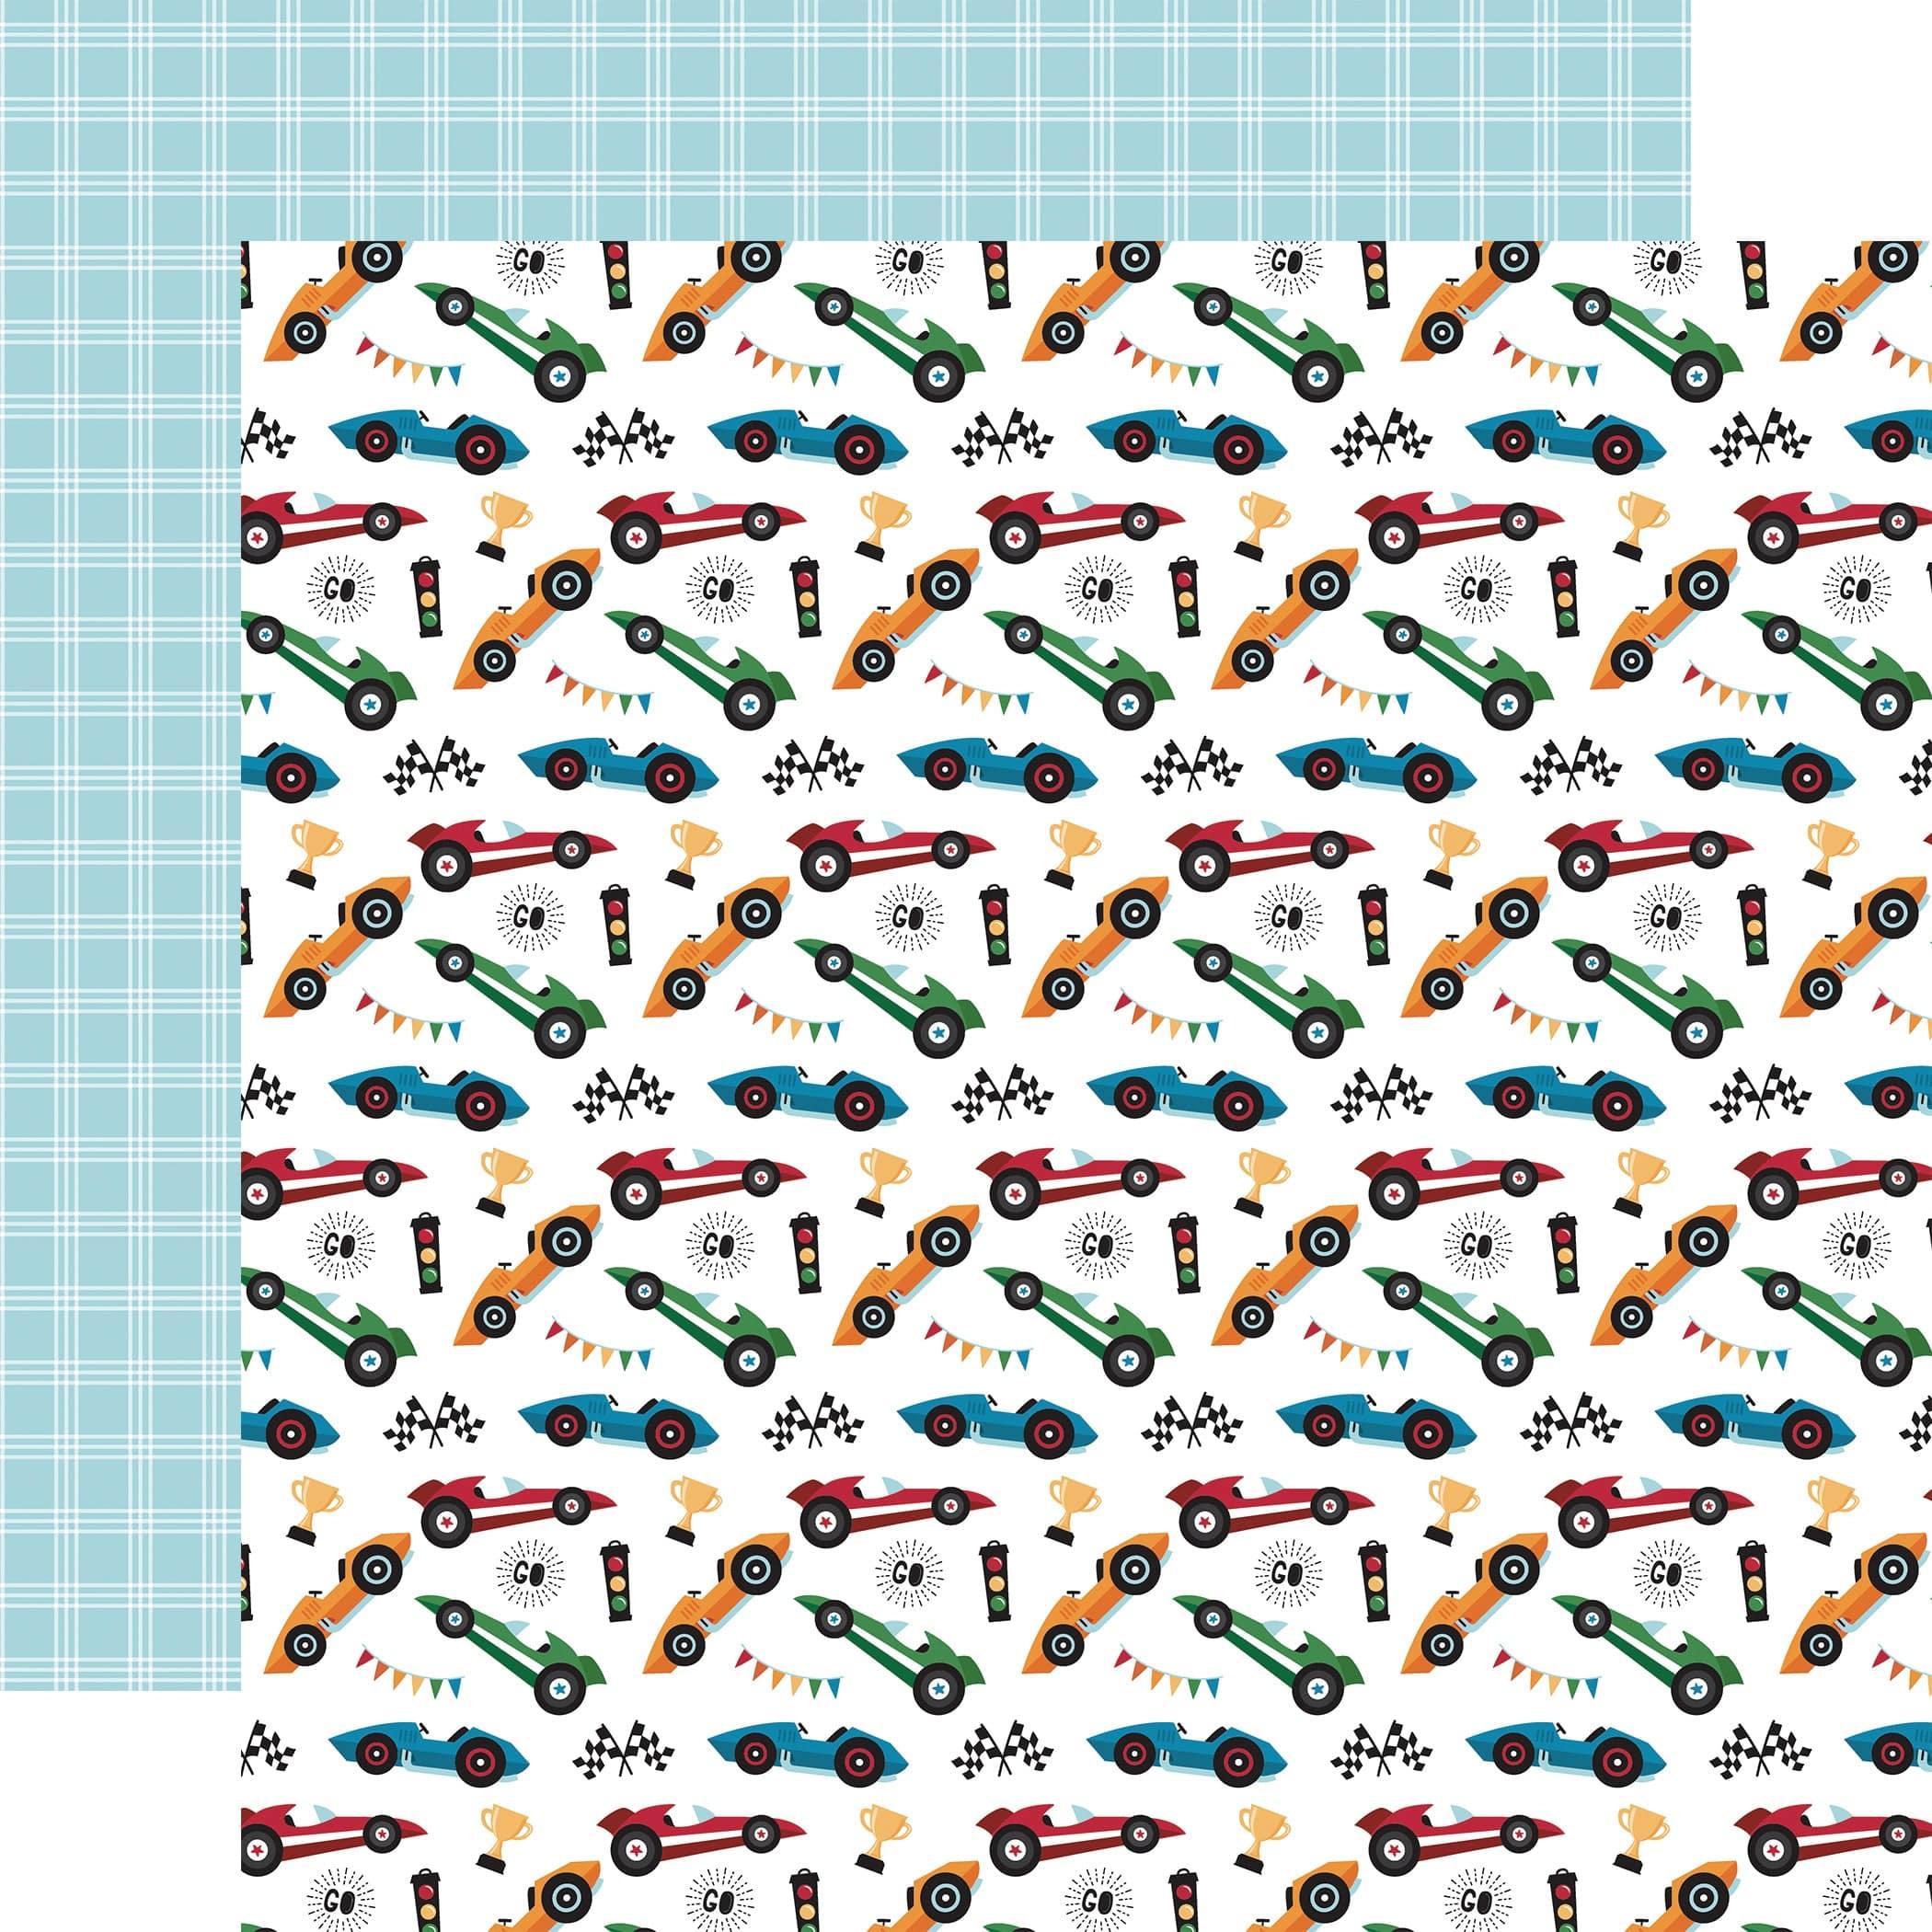 Play All Day Boy Collection Start Your Engines 12 x 12 Double-Sided Scrapbook Paper by Echo Park Paper - Scrapbook Supply Companies